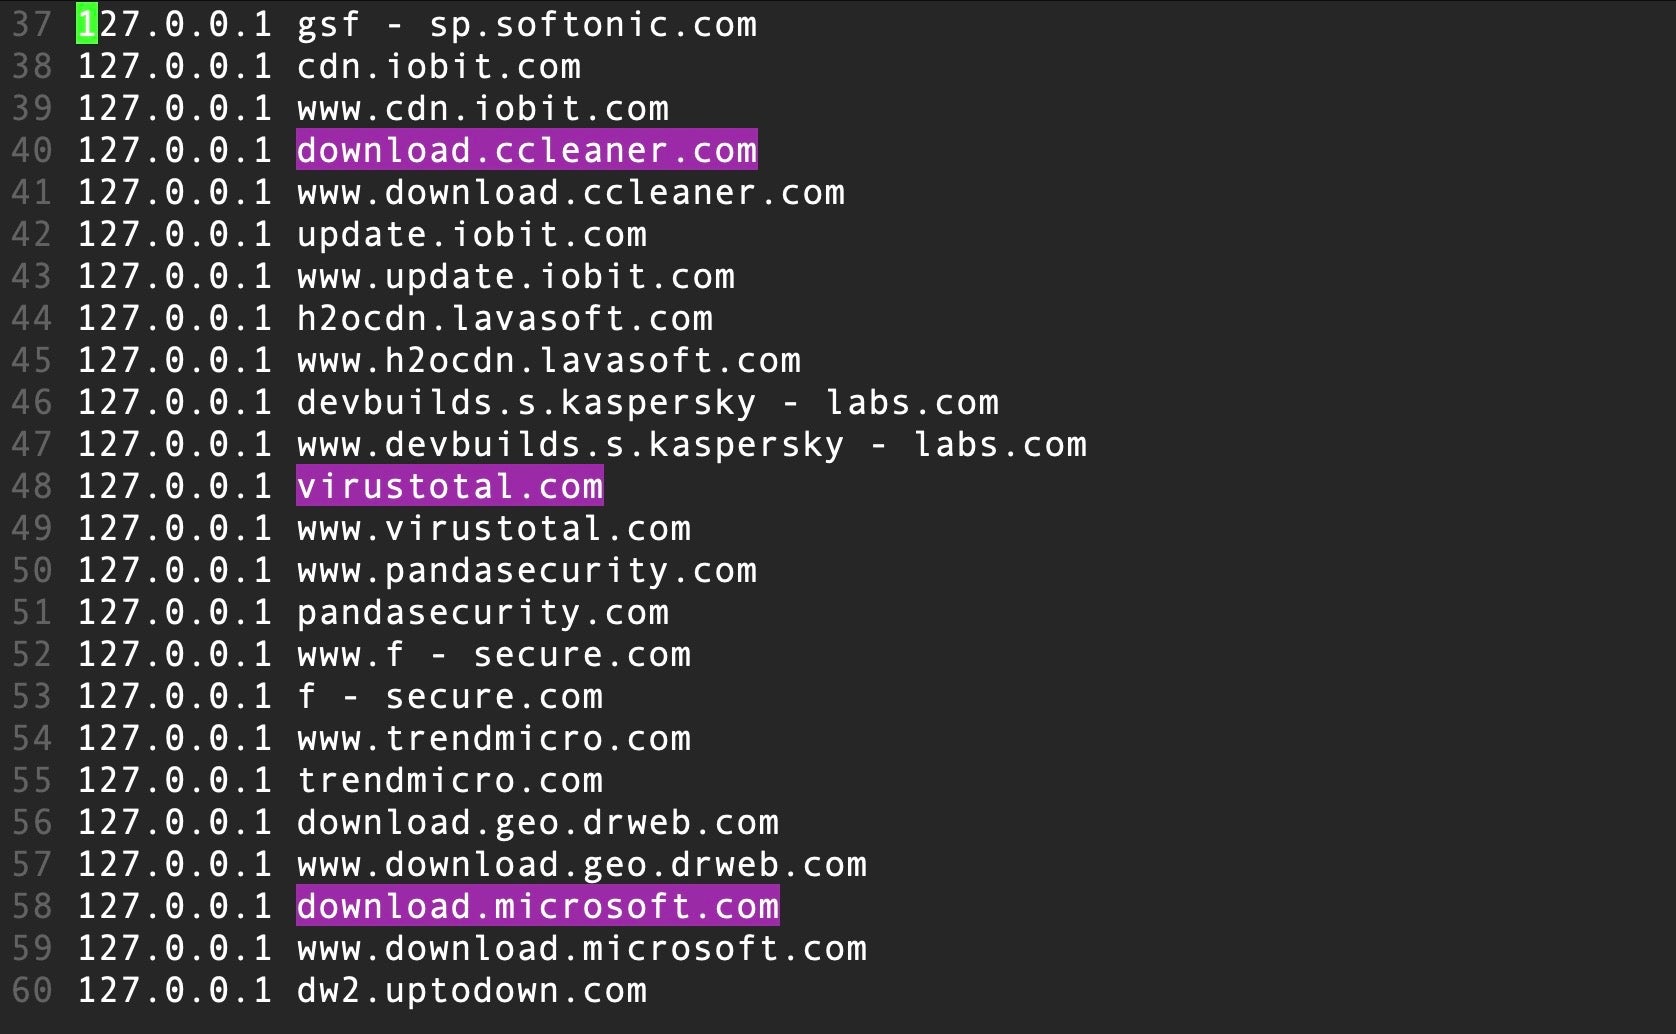 Some of the almost 100 domain names added to the Hosts file